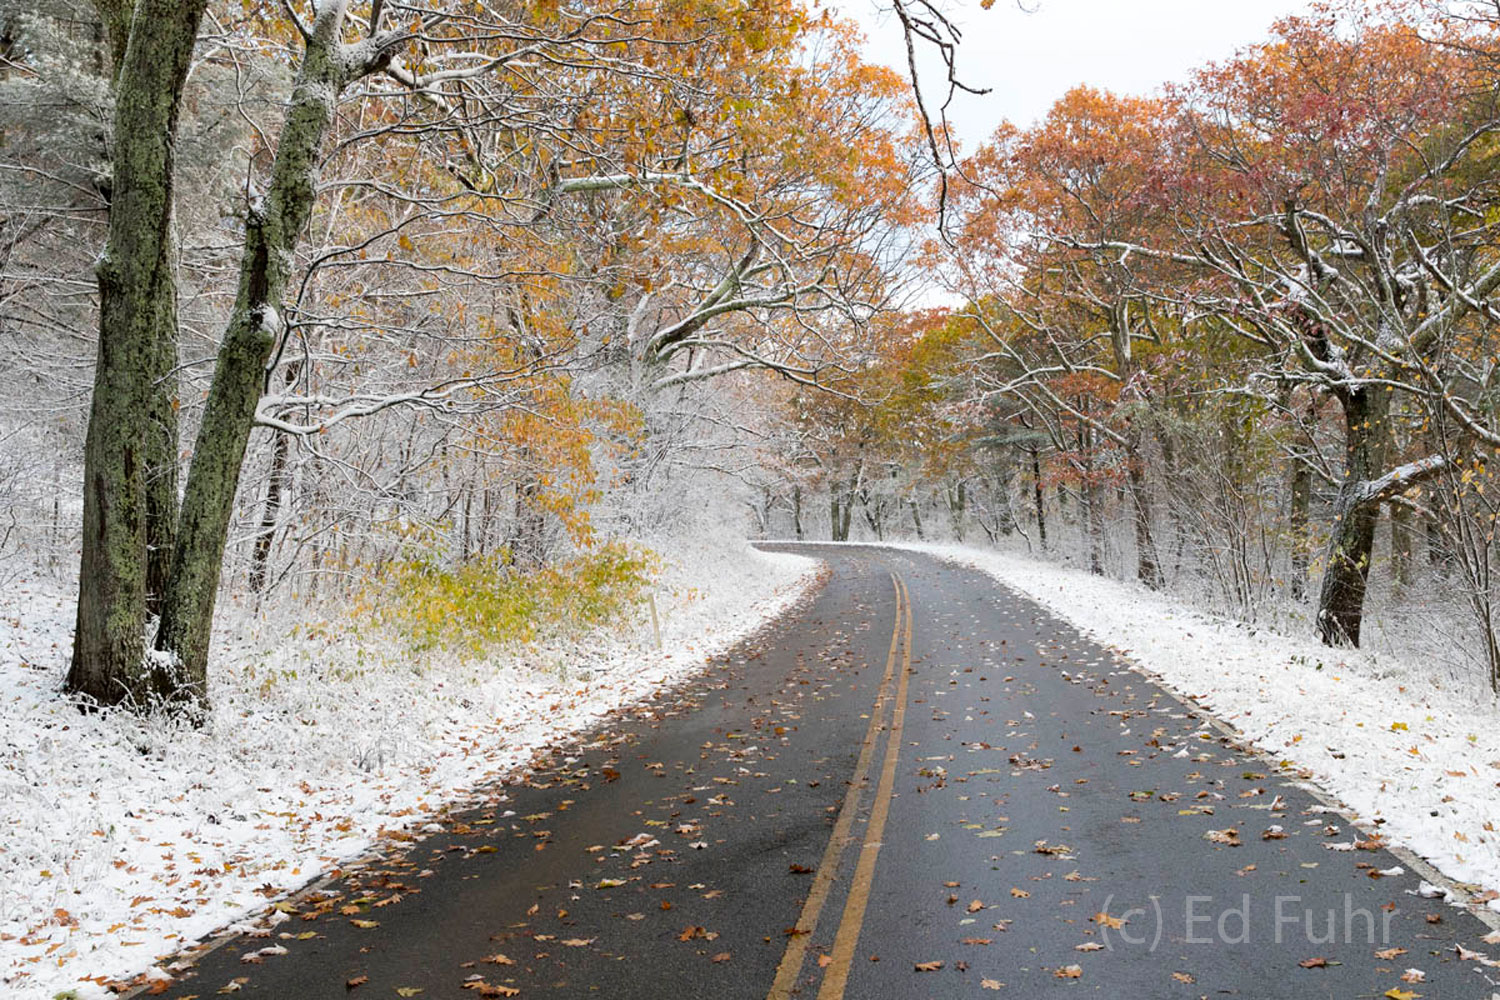 A fall drive in an early snow on Skyline Drive is one of the great experiences in Shenandoah National Park.